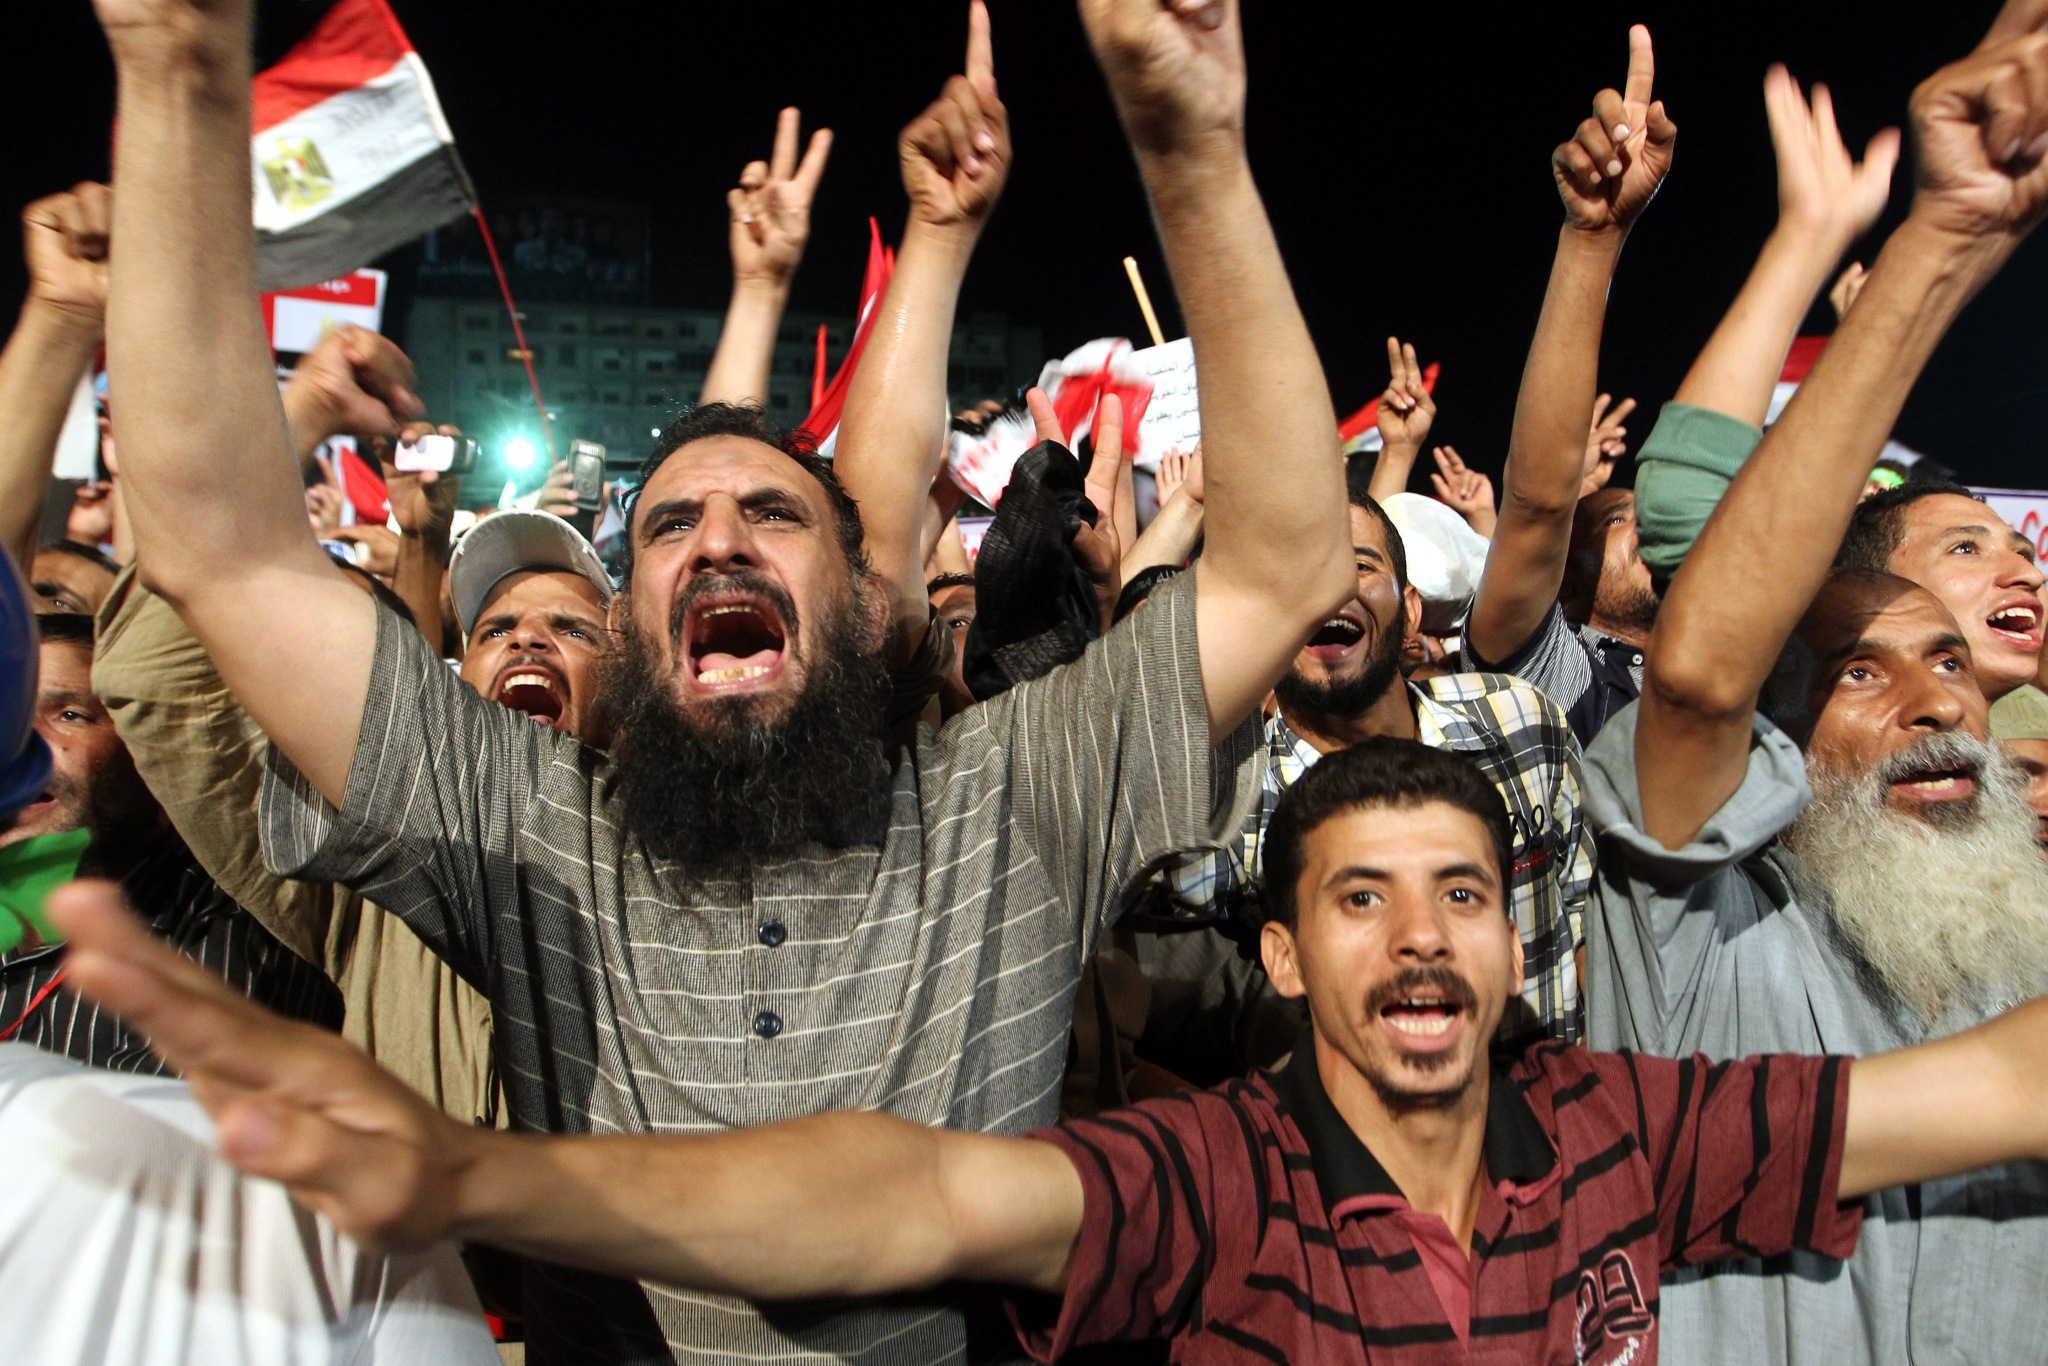 Supporters of the Muslim Brotherhood attend a protest in support of ousted President Mohamed Morsi outside the Rabaa al-Adawiya mosque in in Cairo, Egypt. Photo: EPA